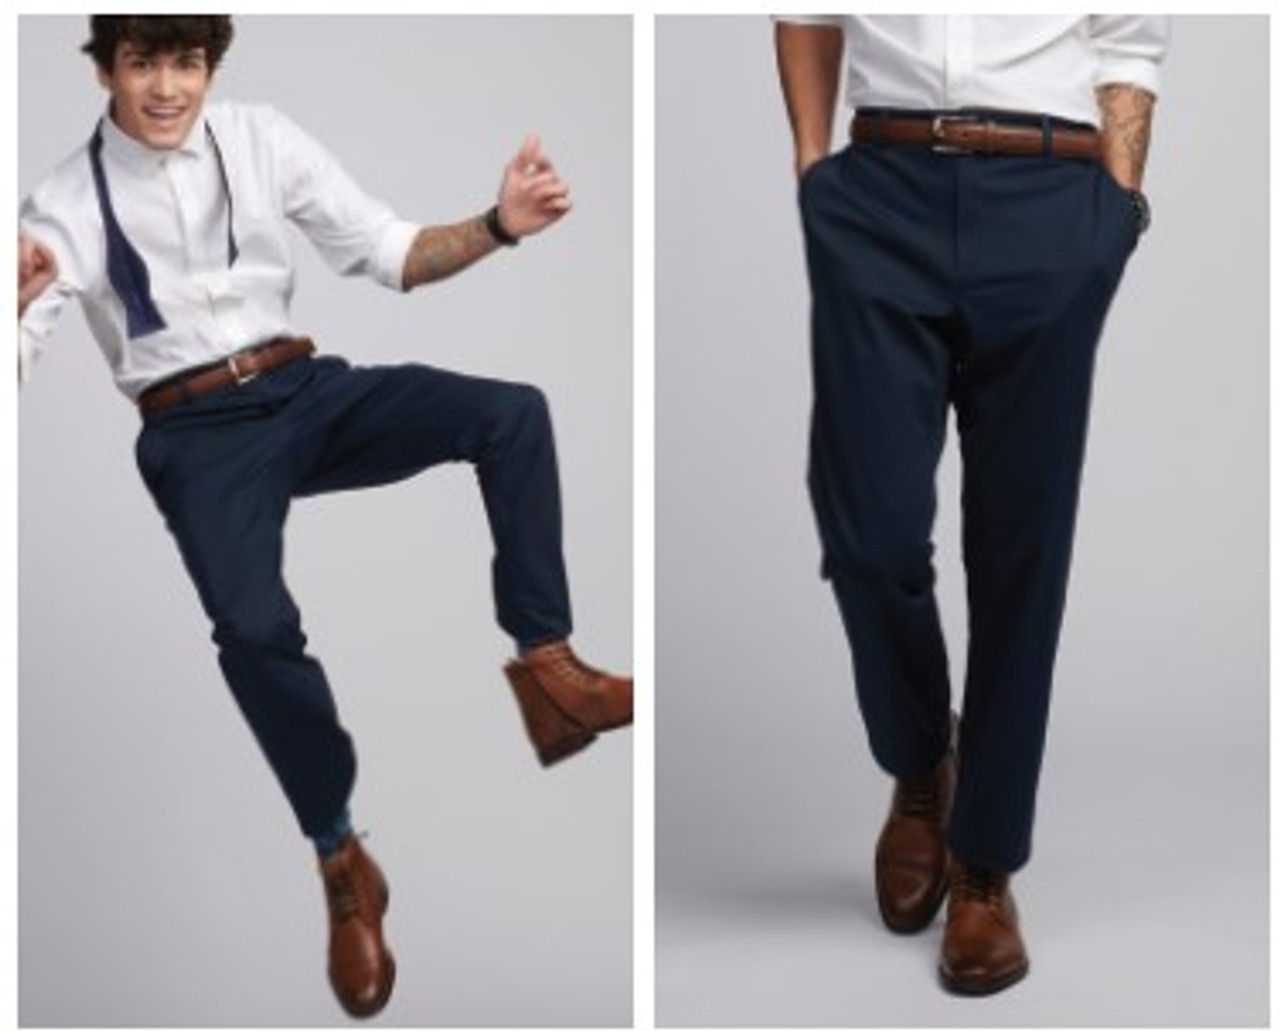 24 Wholesale Boys Slim Fit 97% Cotton Stretch School Chino Pants, Solid  Black Size 18 - at - wholesalesockdeals.com